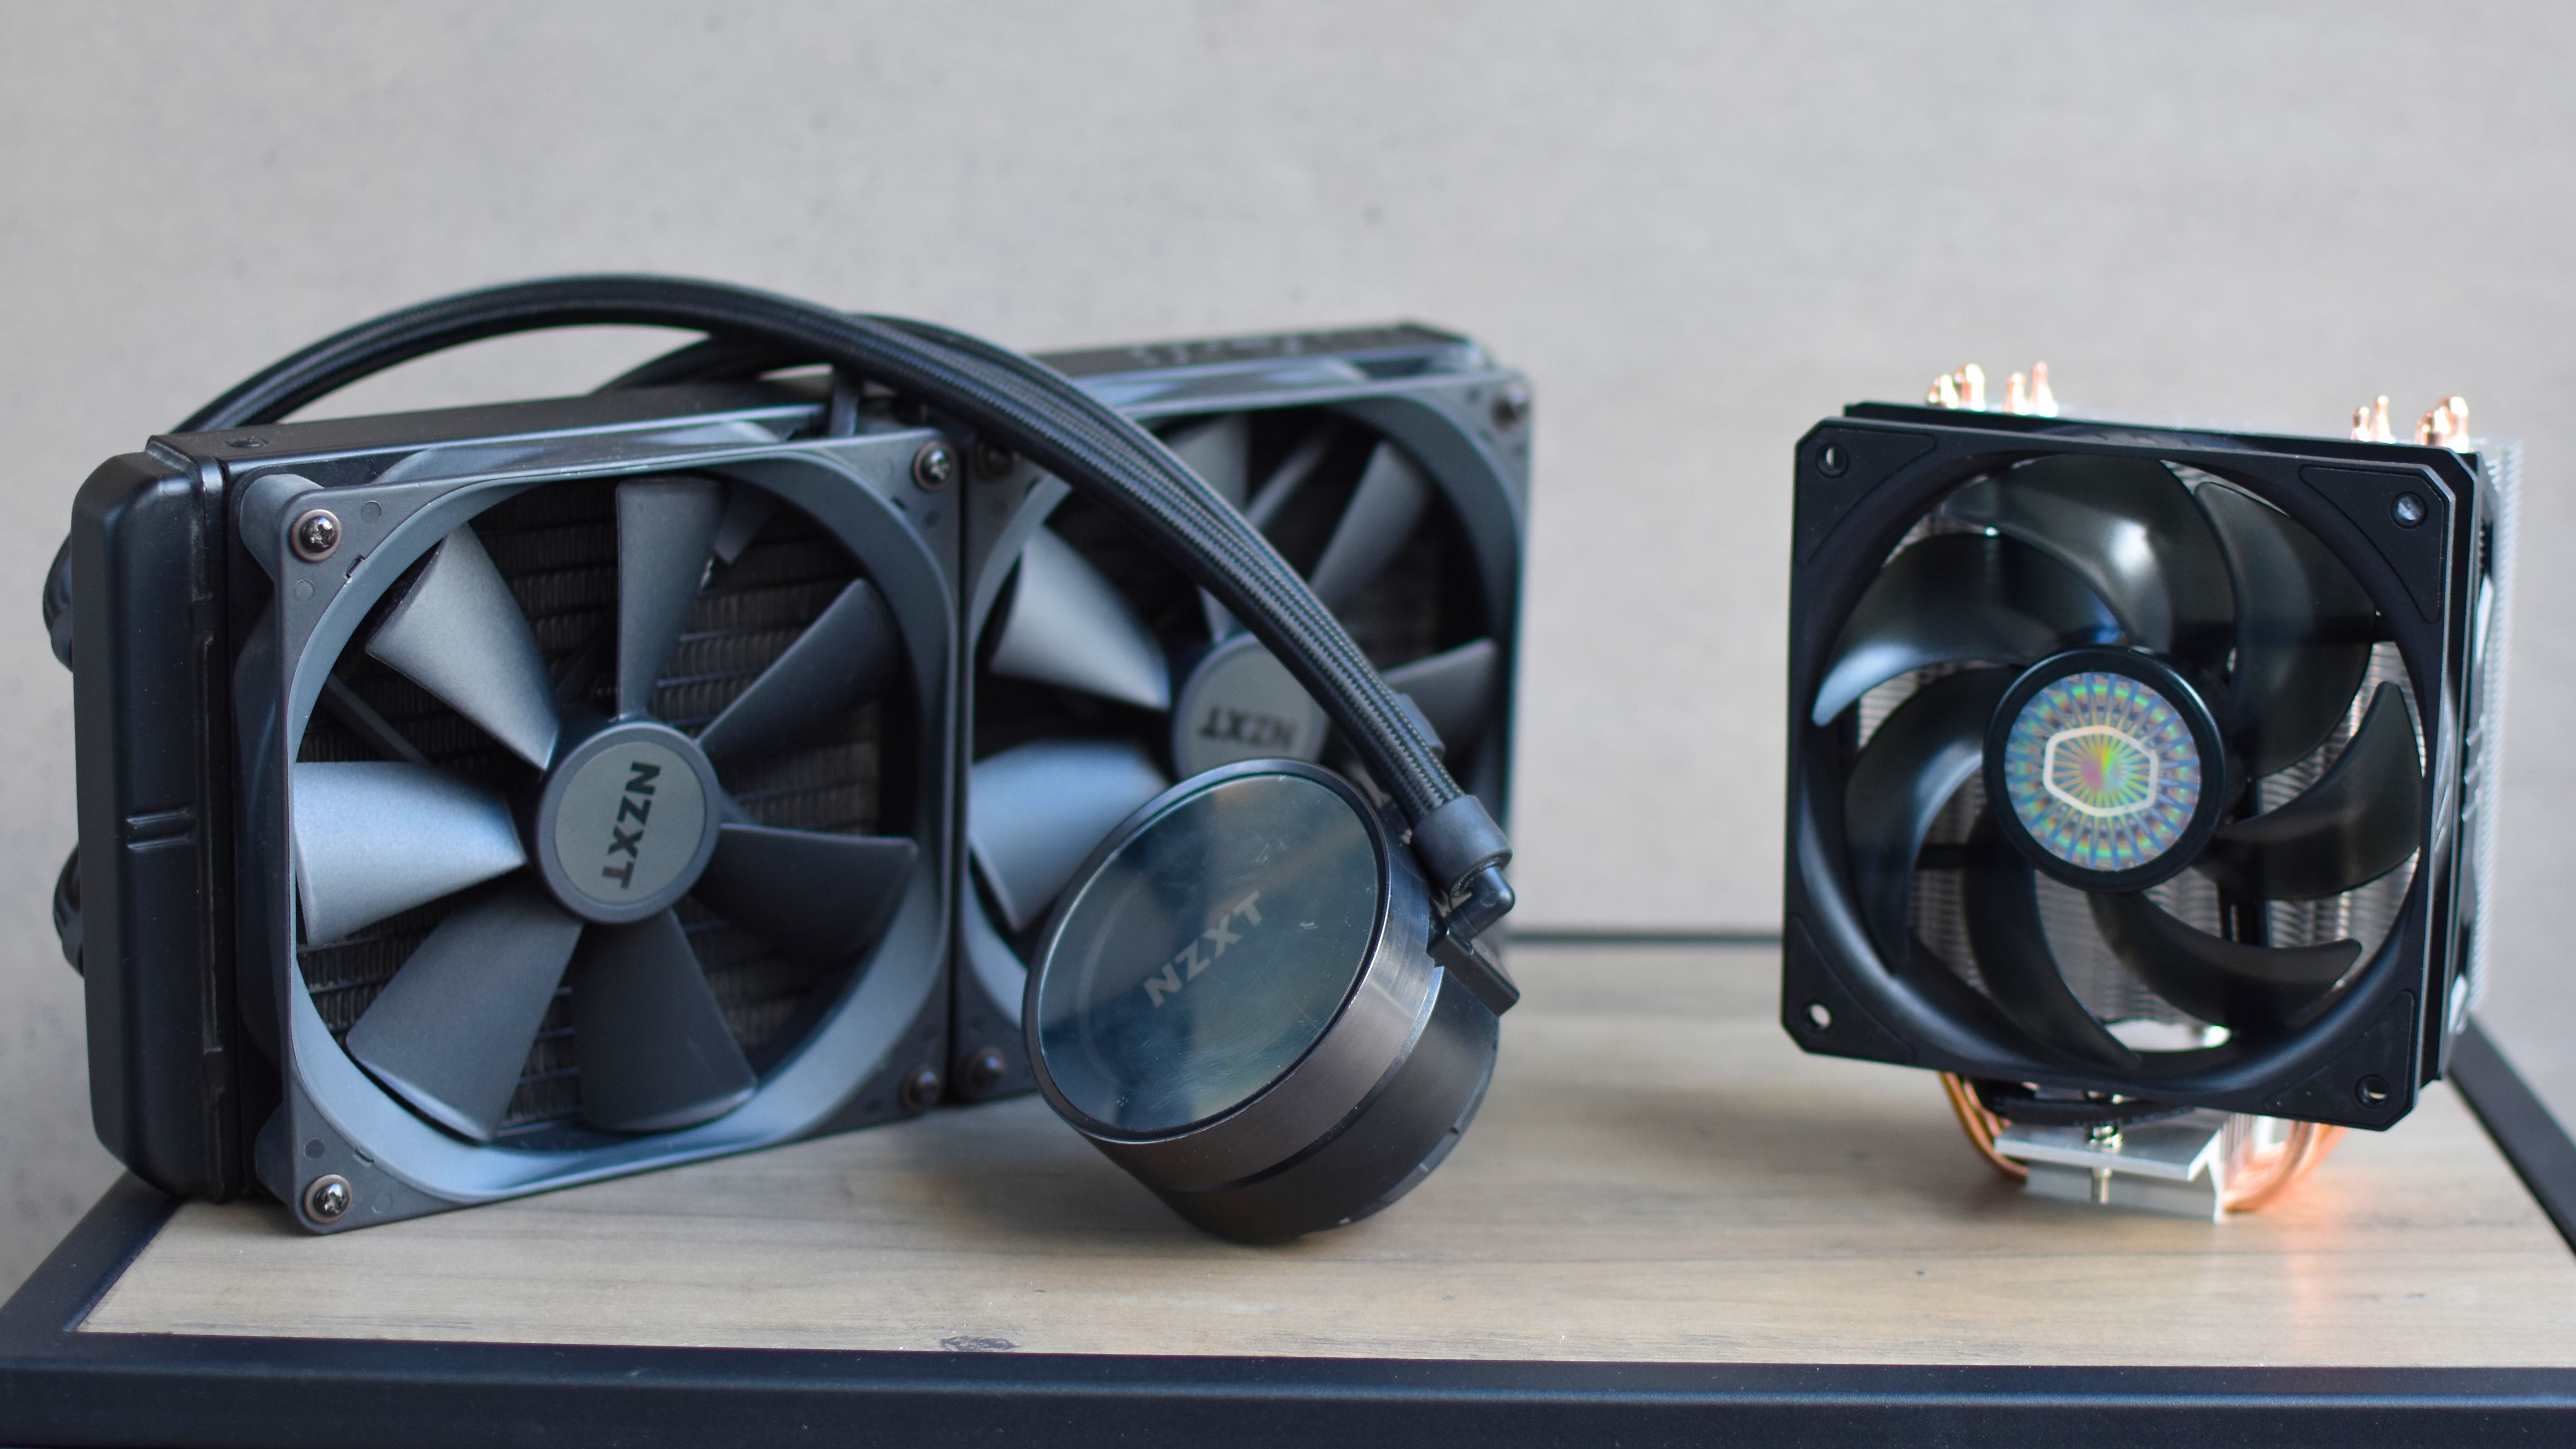 Imminent jazz One night Liquid cooling vs air cooling: which is better? | Rock Paper Shotgun